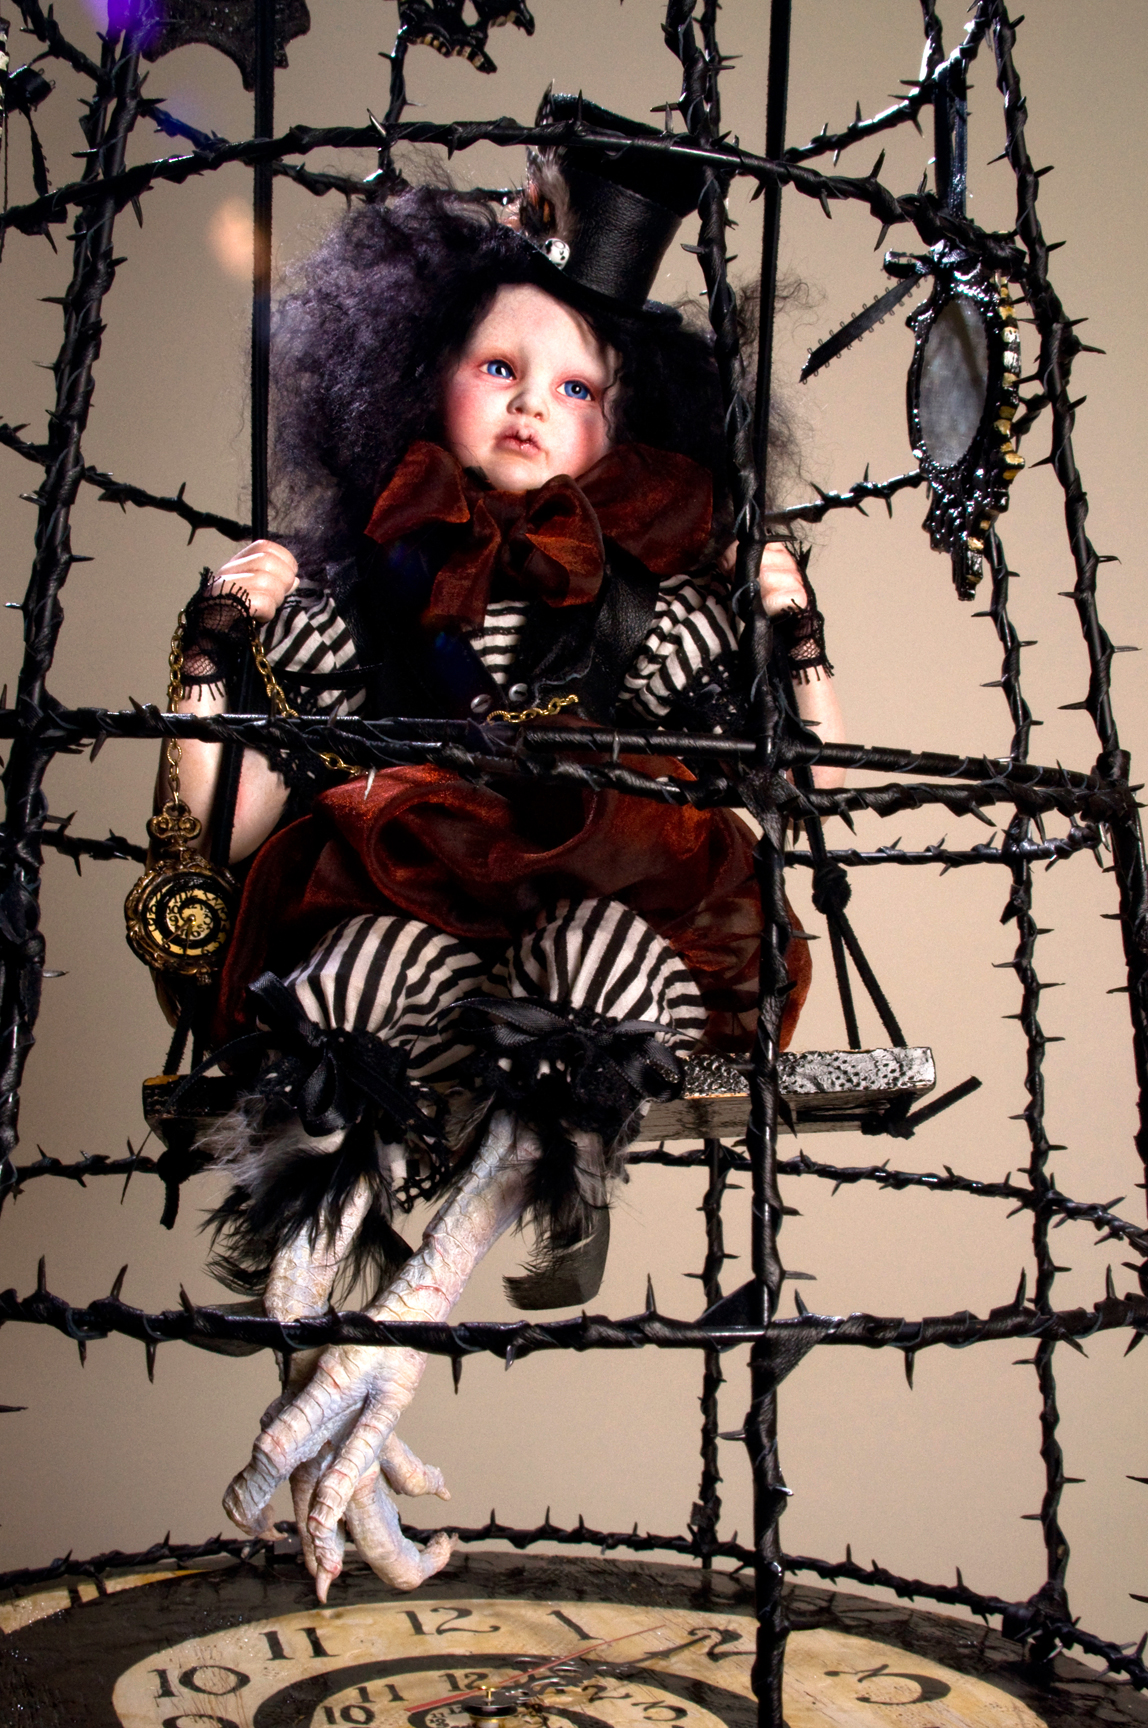 gothic artdoll wearing black tophat with black hair taxidermied bird feet suspended in a cage with a hand-painted clock spiral base in a thorny black birdcage surrounded by gothic portraits of himself